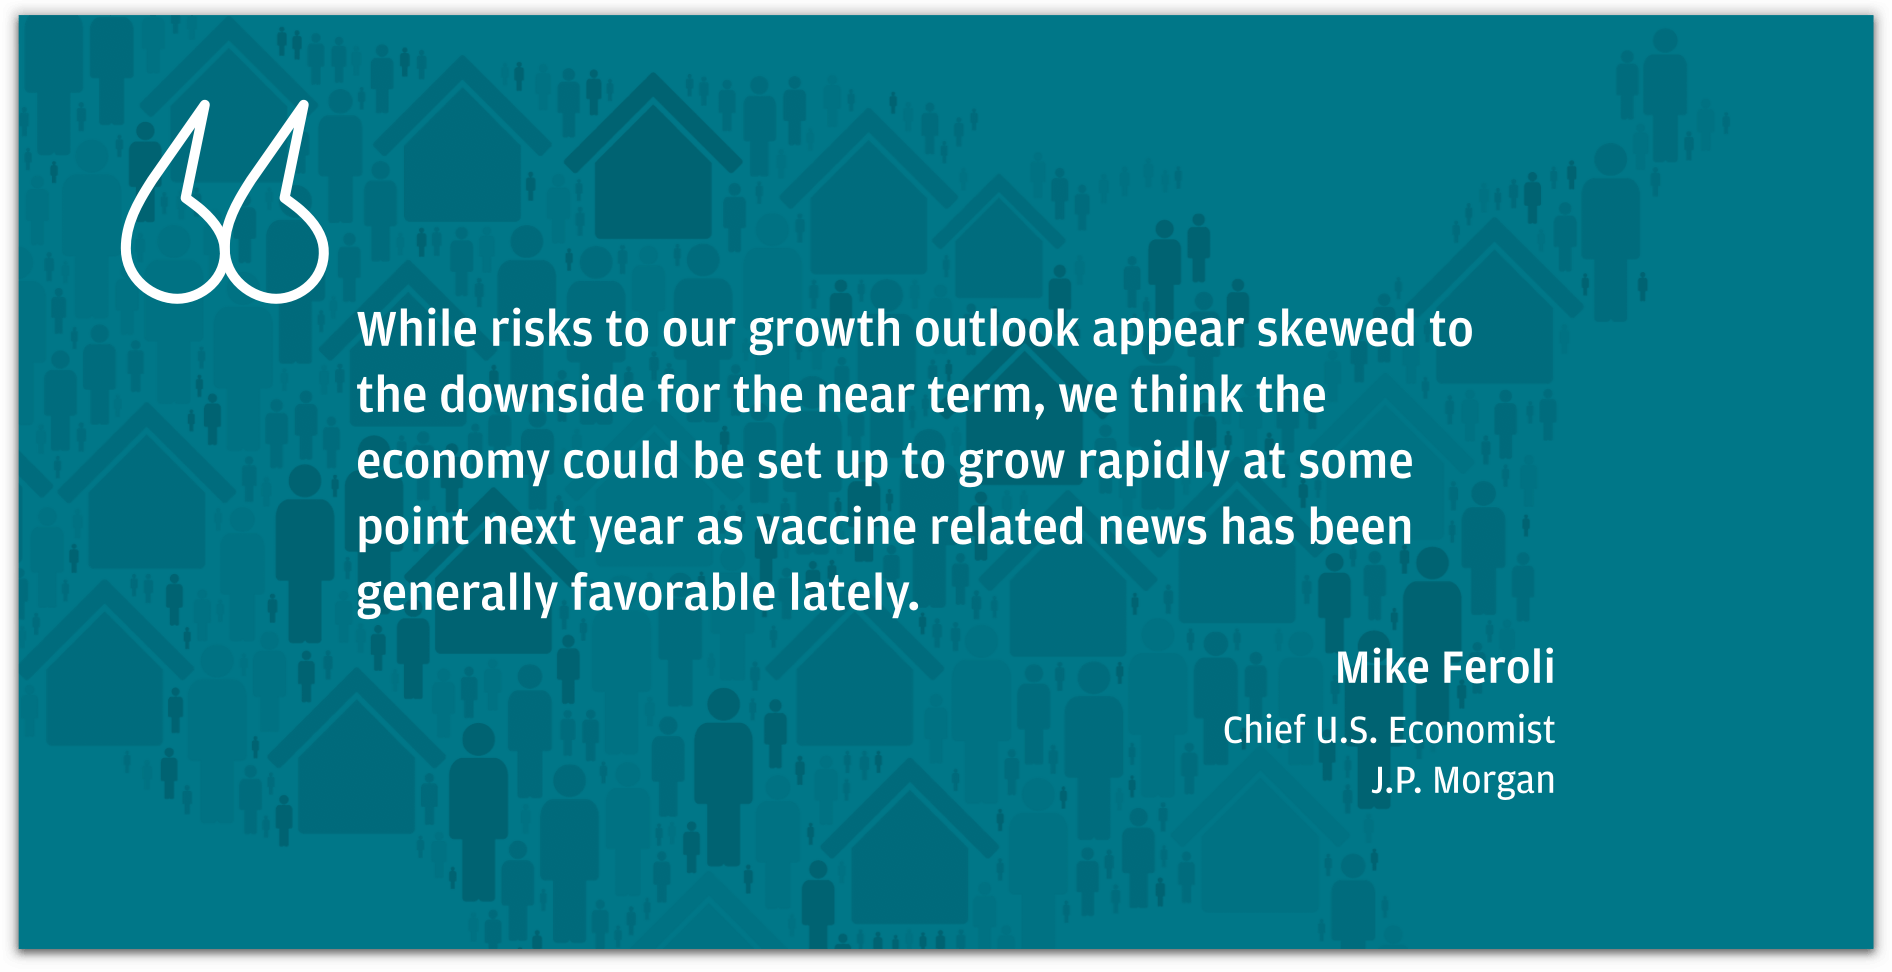 While risks to our growth outlook appear skewed to the downside for the near term, we think the economy could be set up to grow rapidly at some point next year as vaccine related news has been generally favorable lately.